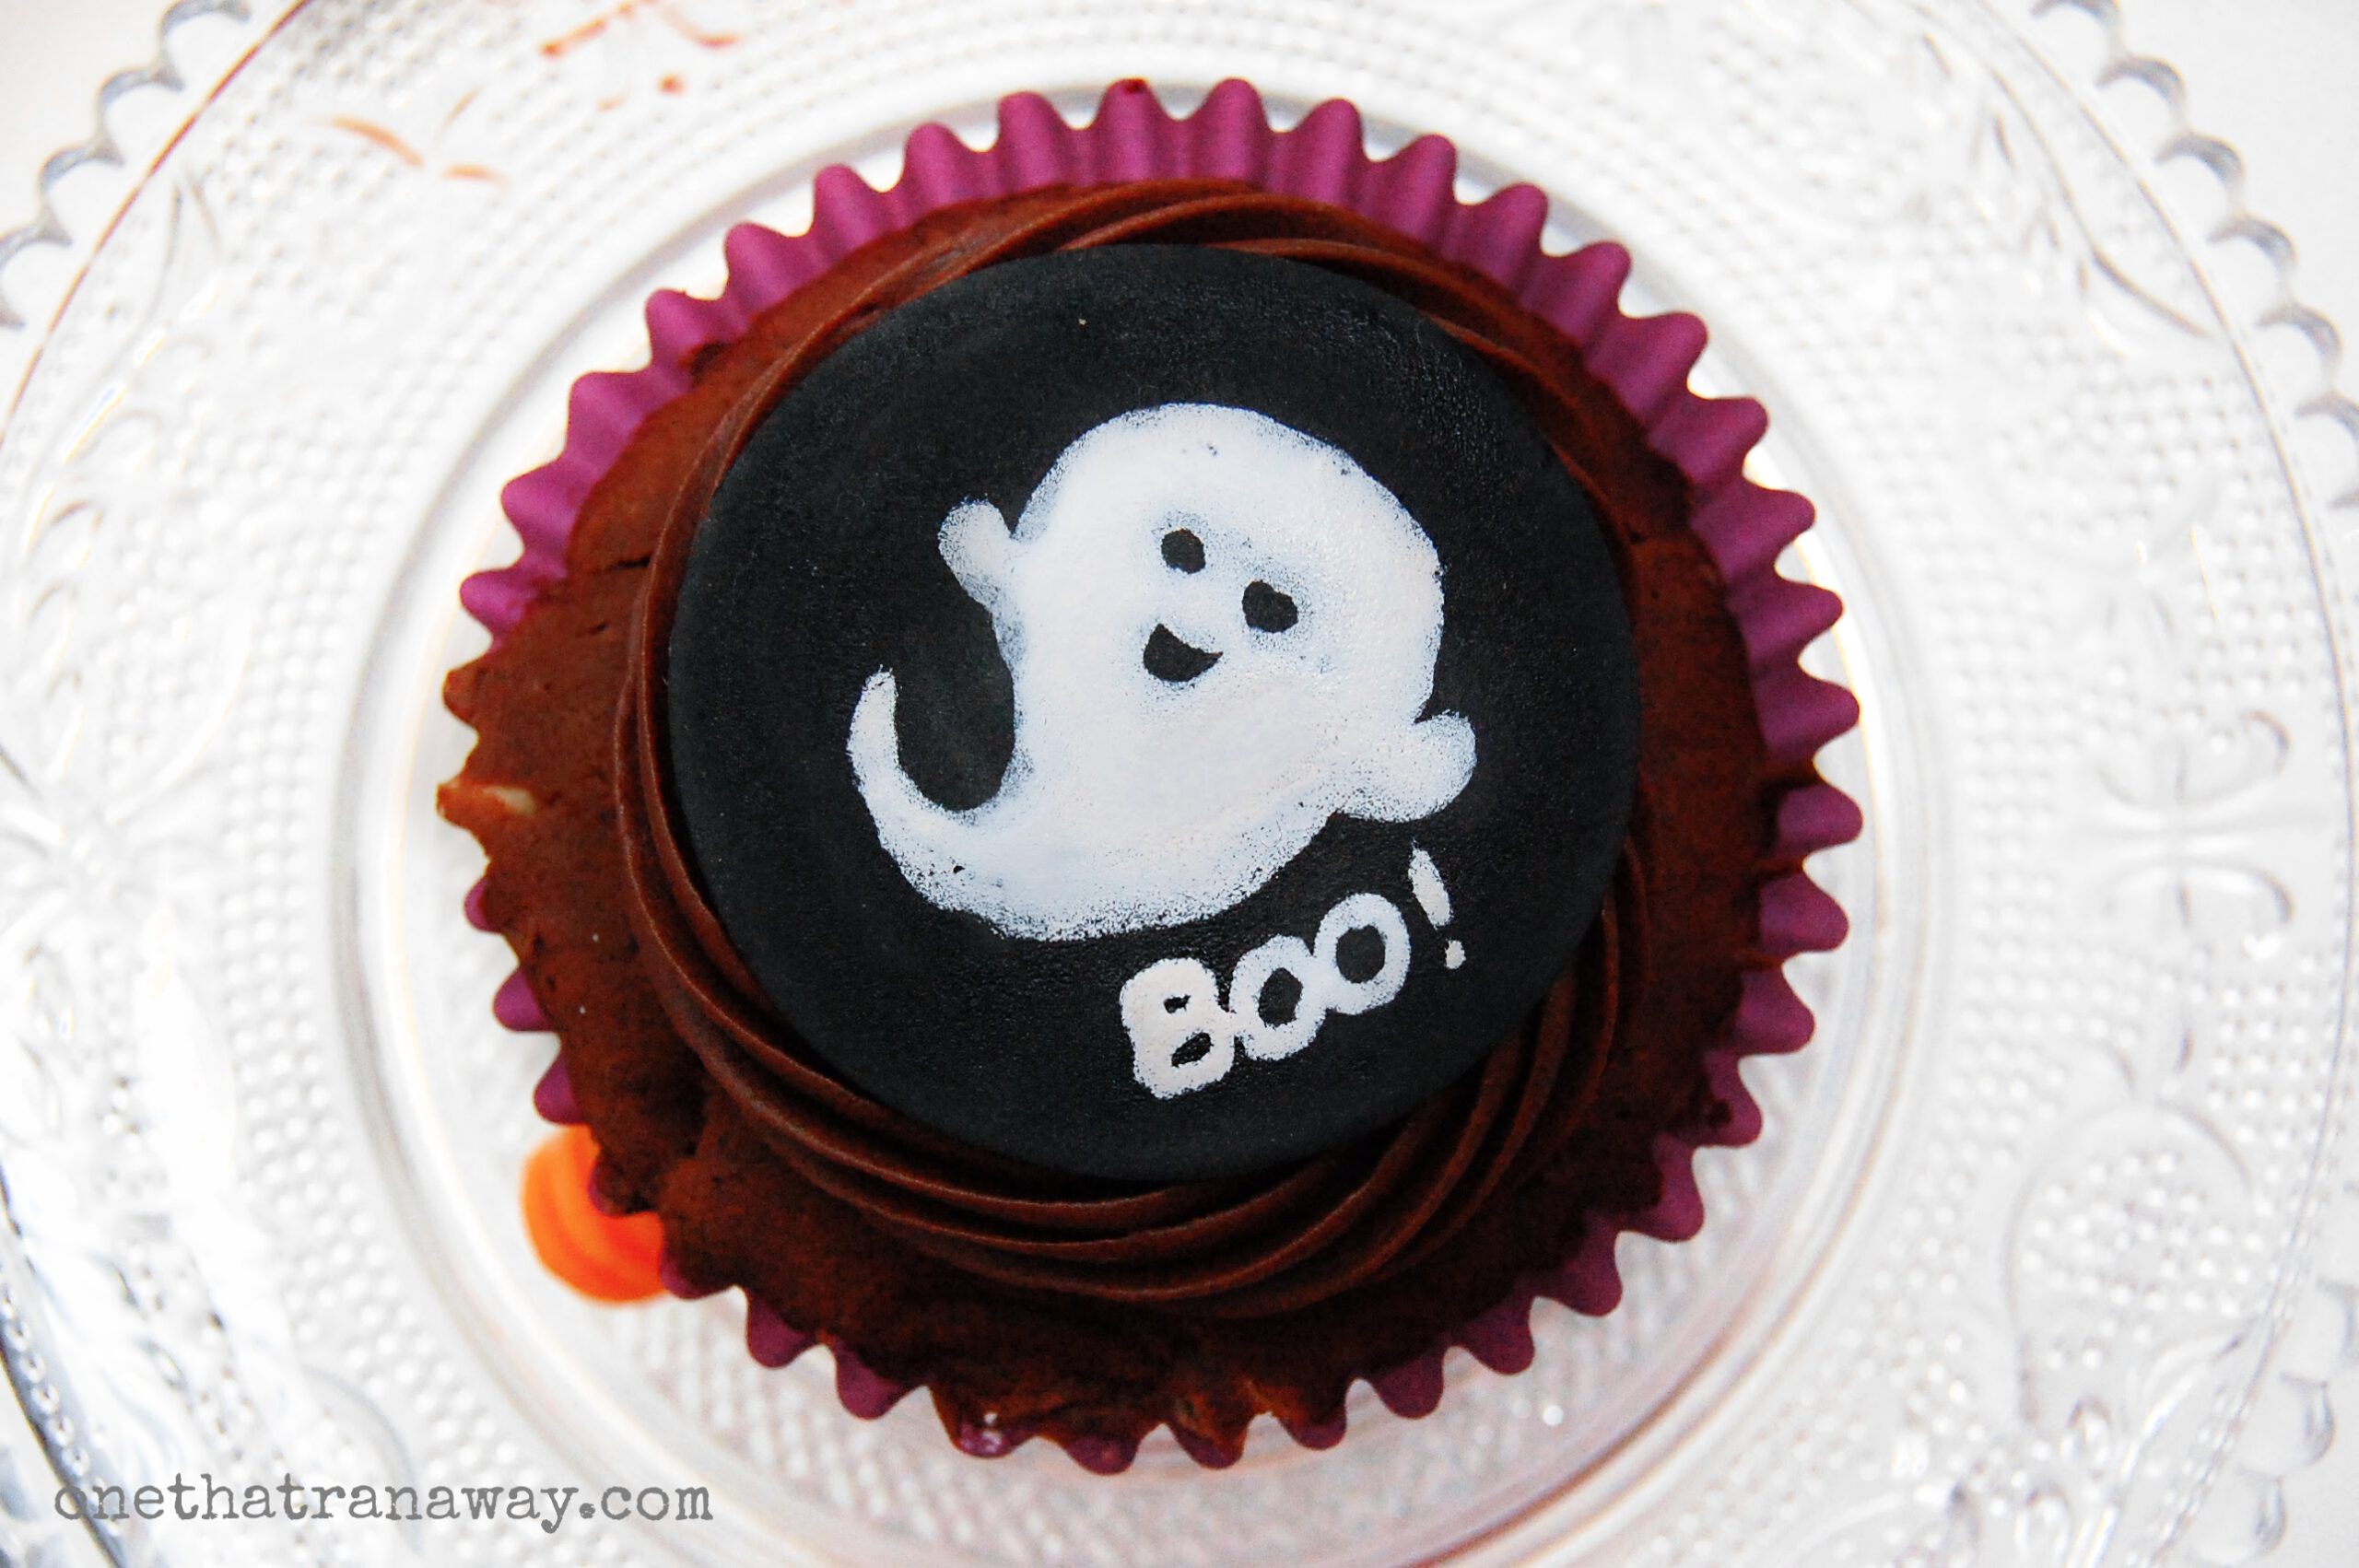 chocolate cupcake with a black fondant topper showing the silhouette of a ghost